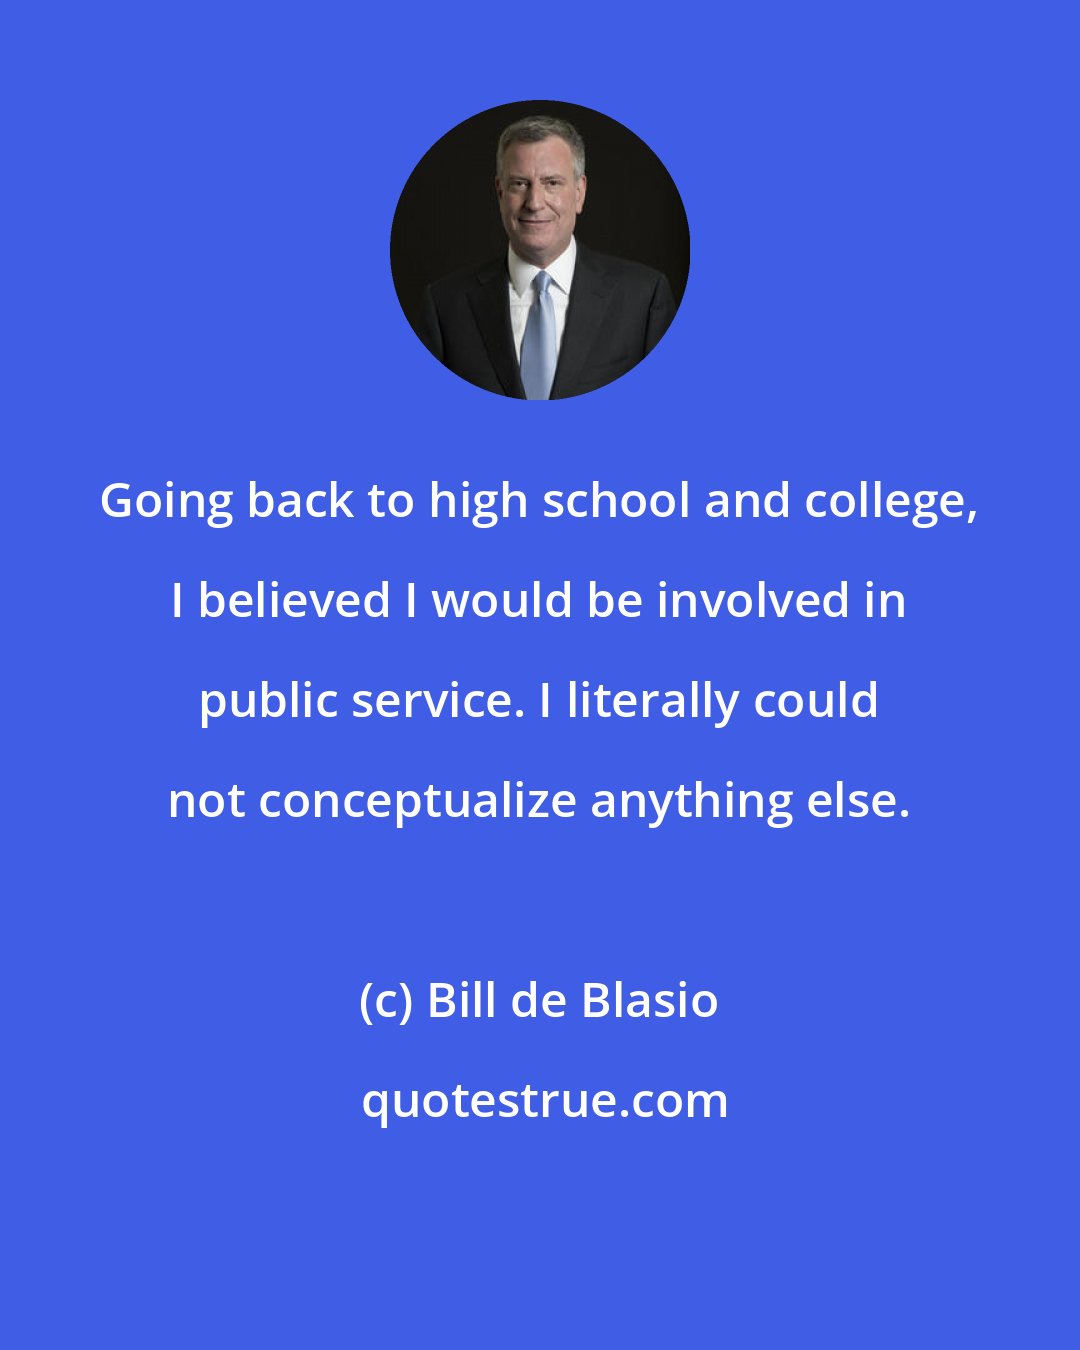 Bill de Blasio: Going back to high school and college, I believed I would be involved in public service. I literally could not conceptualize anything else.